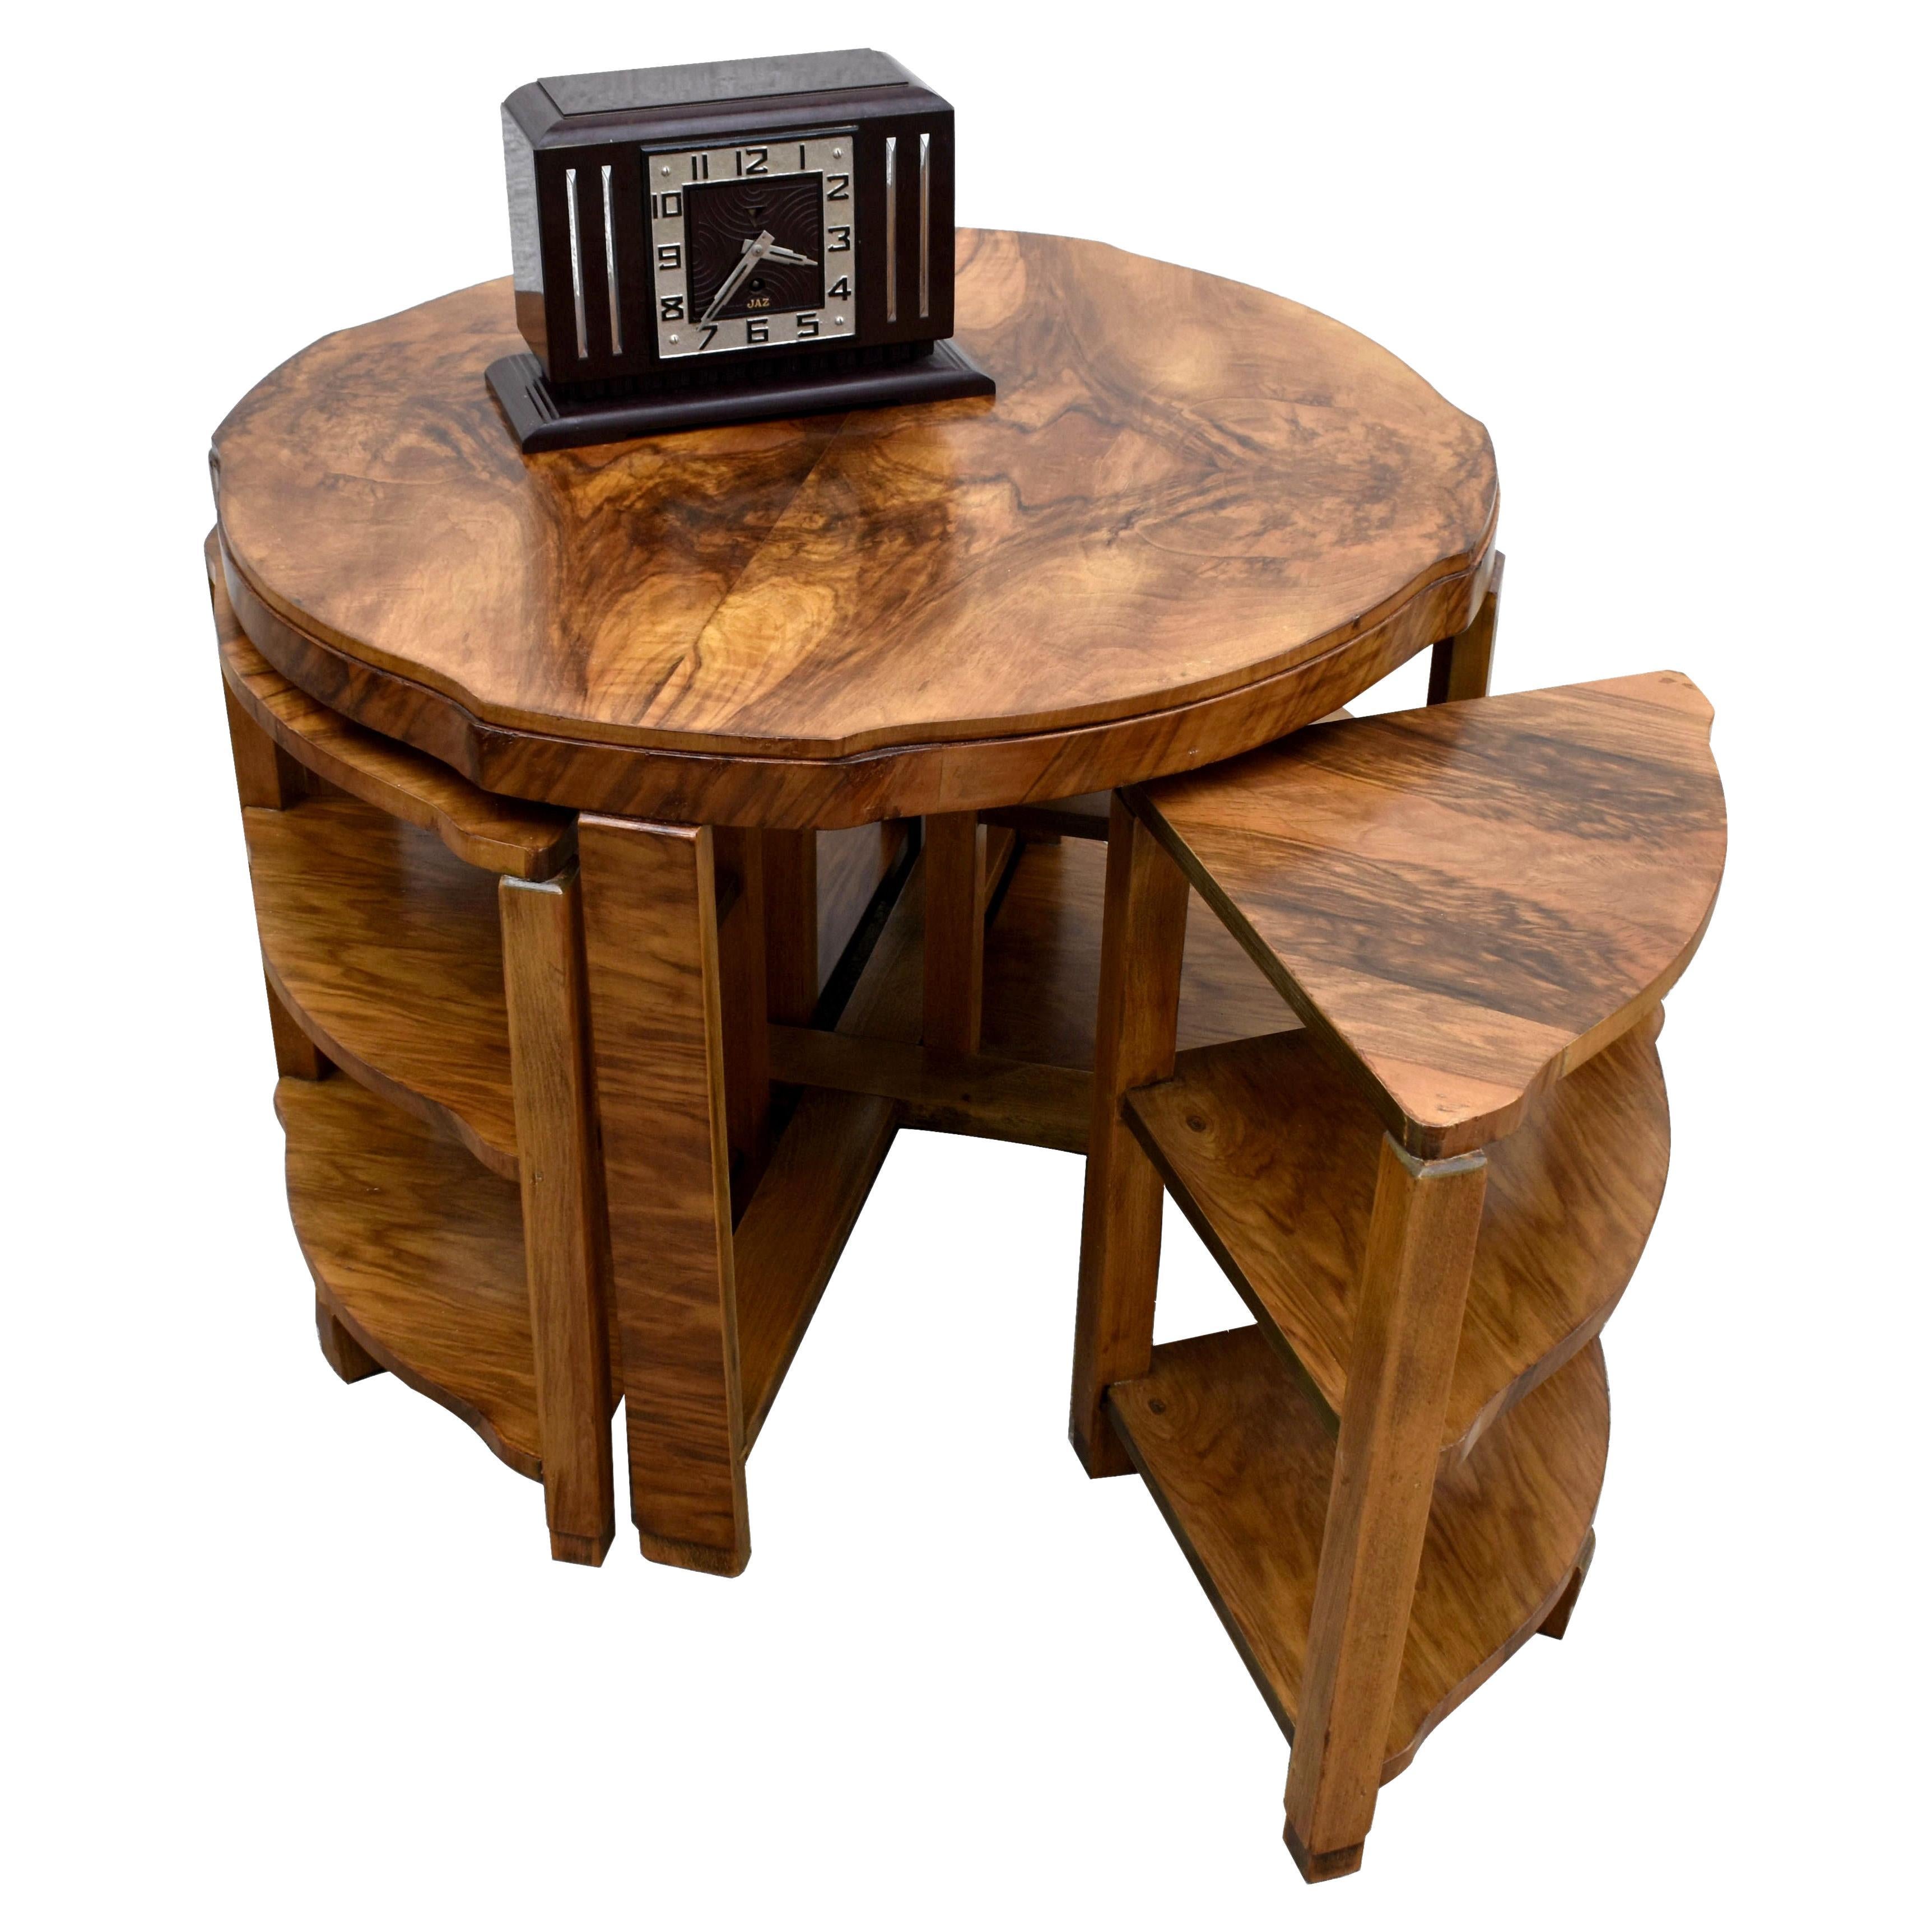 Art Deco High Quality Figured Walnut Quintetto Nest of 5 Tables, English, 1930 For Sale